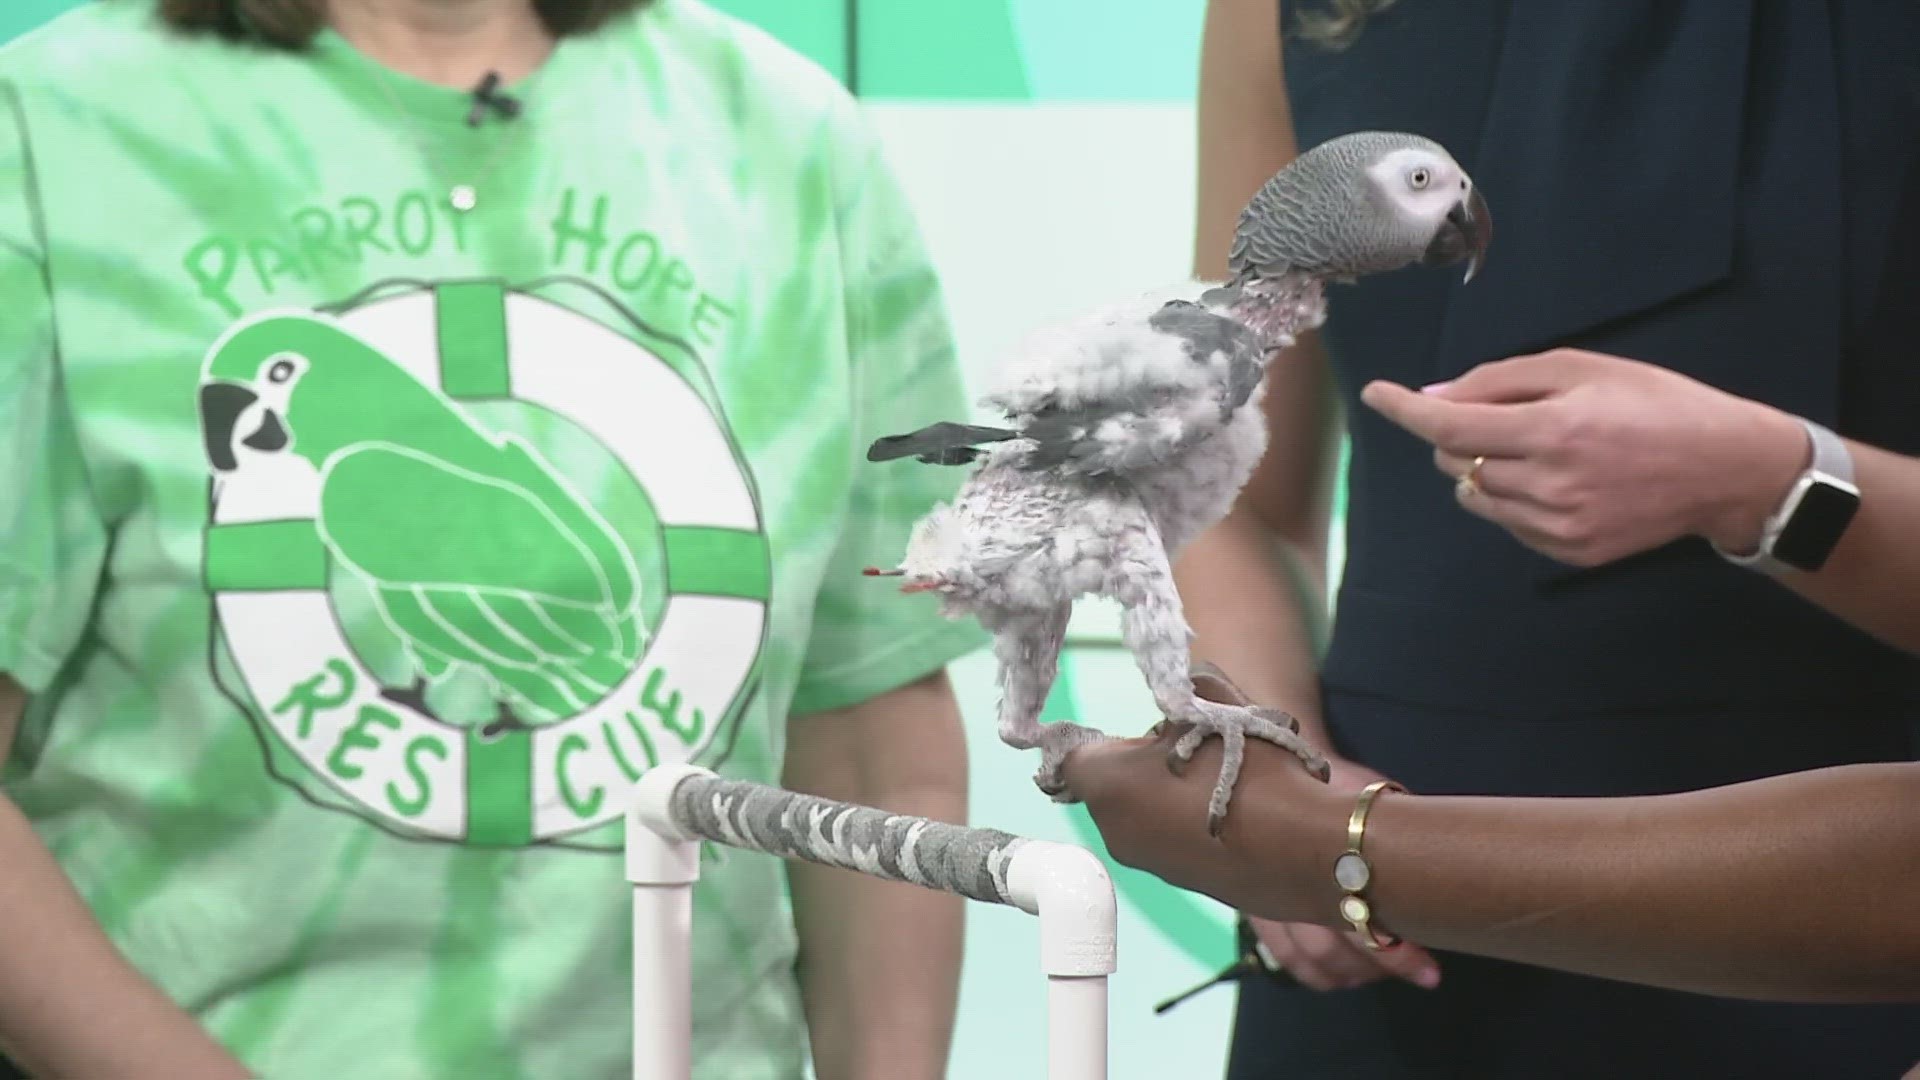 Parrot Hope Rescue from Mantua, Ohio visited 3News to show off one of their adoptable birds.